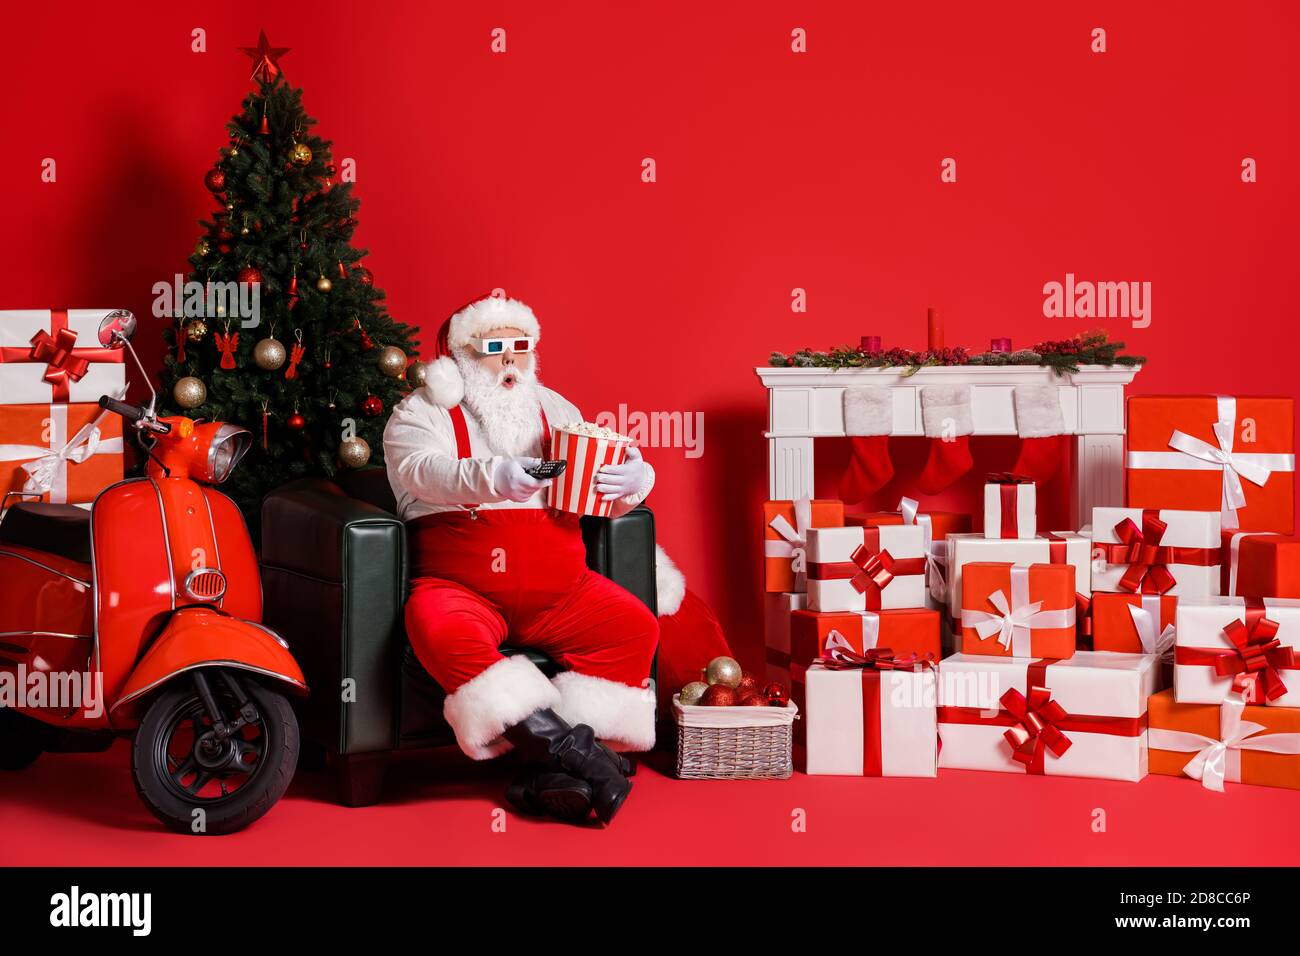 https://c8.alamy.com/comp/2D8CC6P/full-length-photo-of-astonished-santa-claus-switch-control-3d-film-hold-pop-corn-box-isolated-on-red-color-background-with-x-mas-ornament-2D8CC6P.jpg